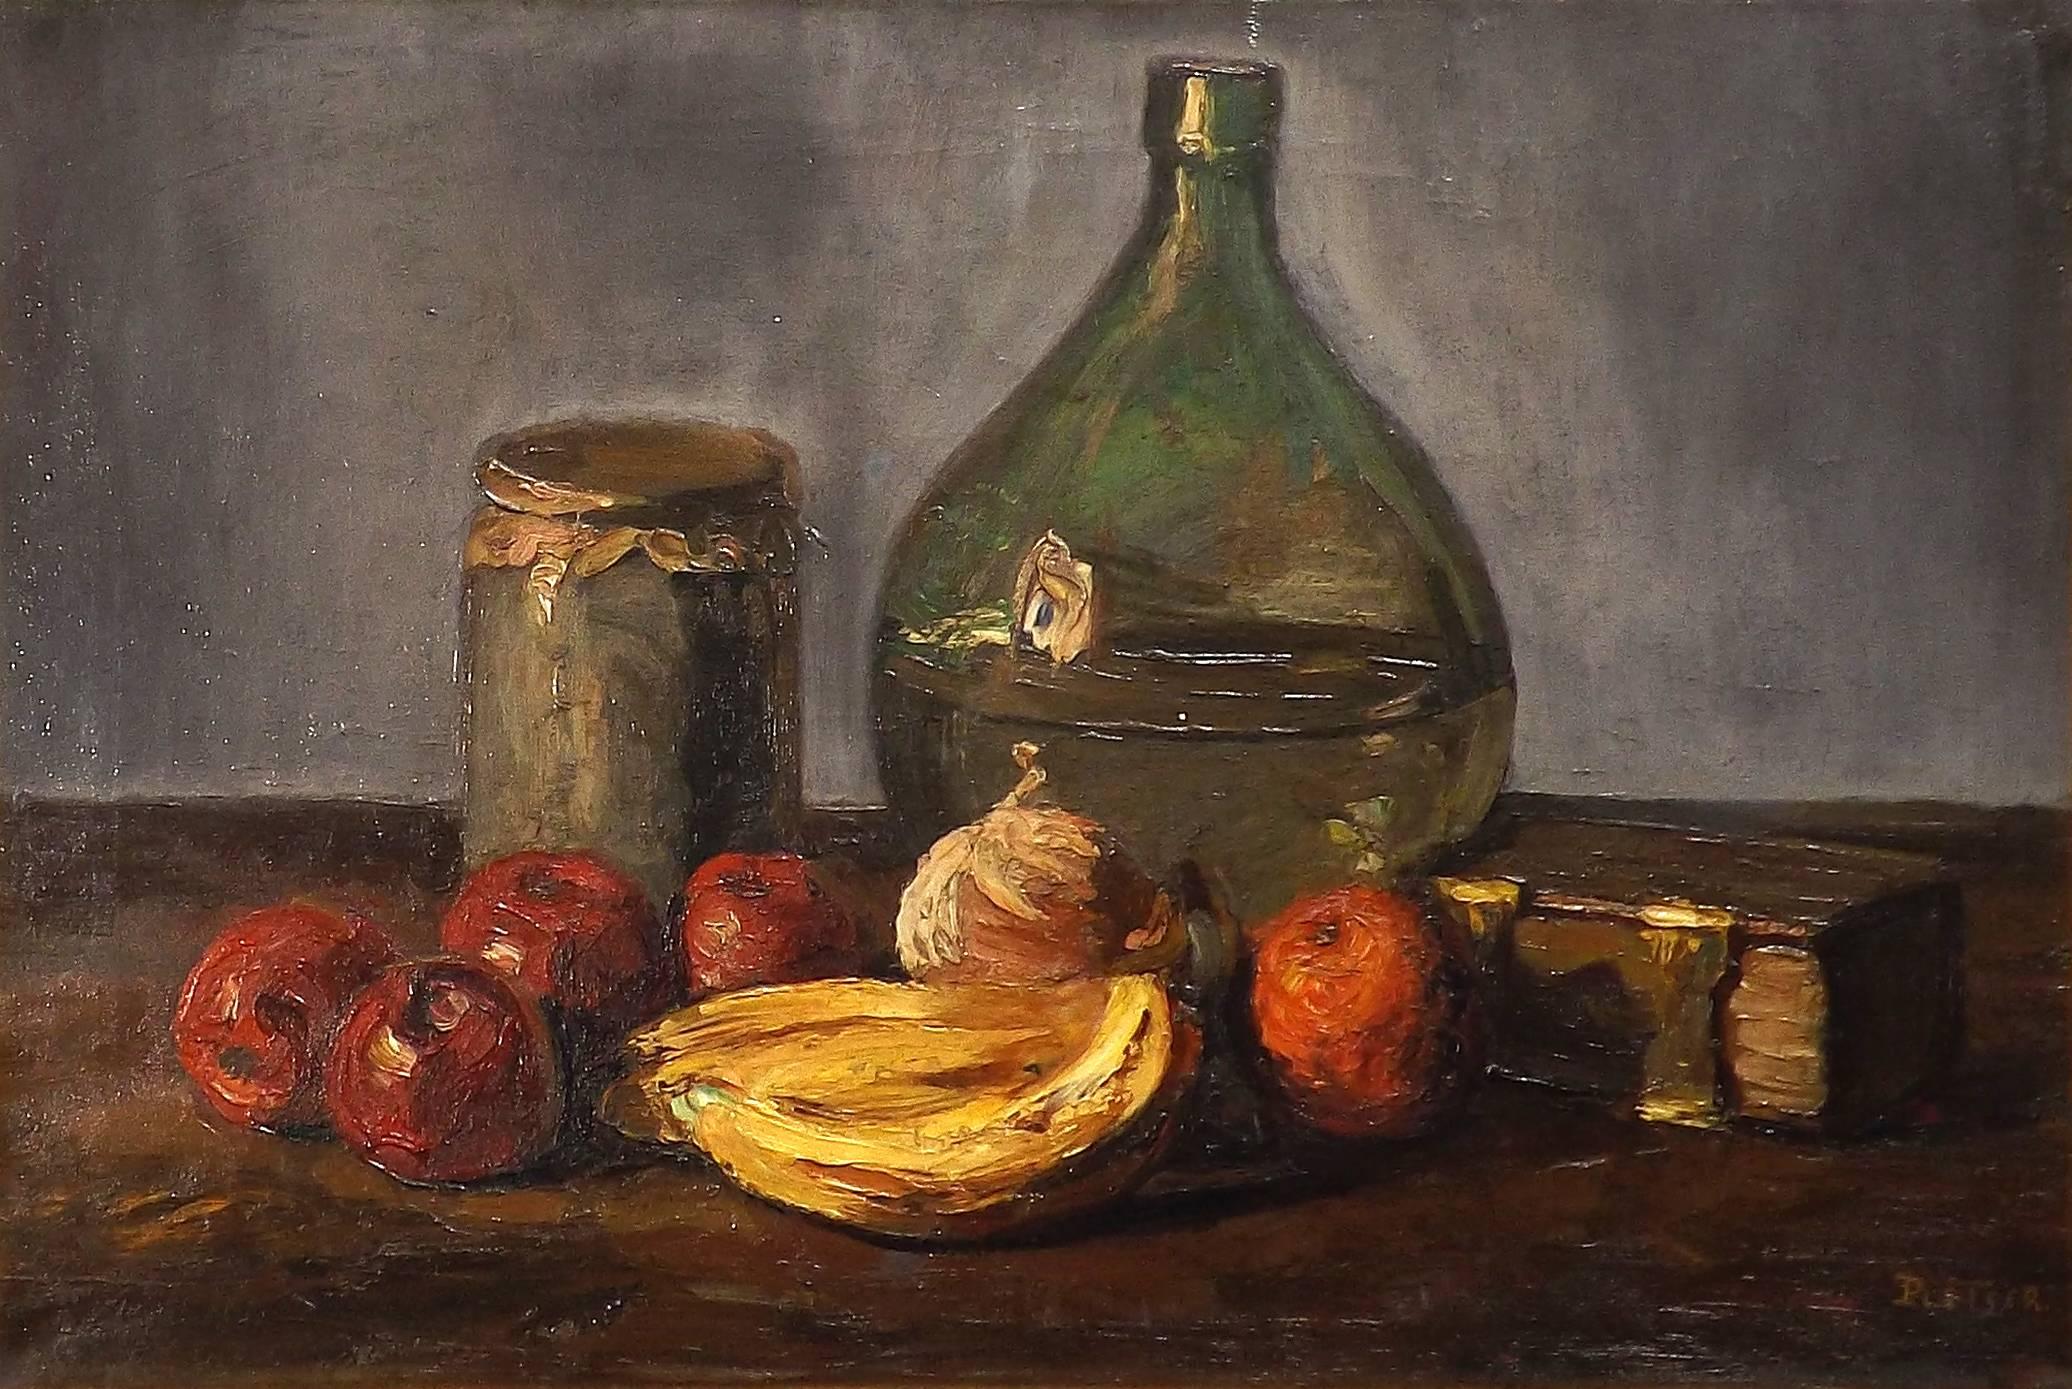 A still life masterfully painted by Dutch artist Jurgen 'George' Pletser. Ripe red apples, yellow bananas and a glass water are the focus of the painter's eye. To the side one can see the bright brass clasps of an old bible. 

Jurgen Pletser was